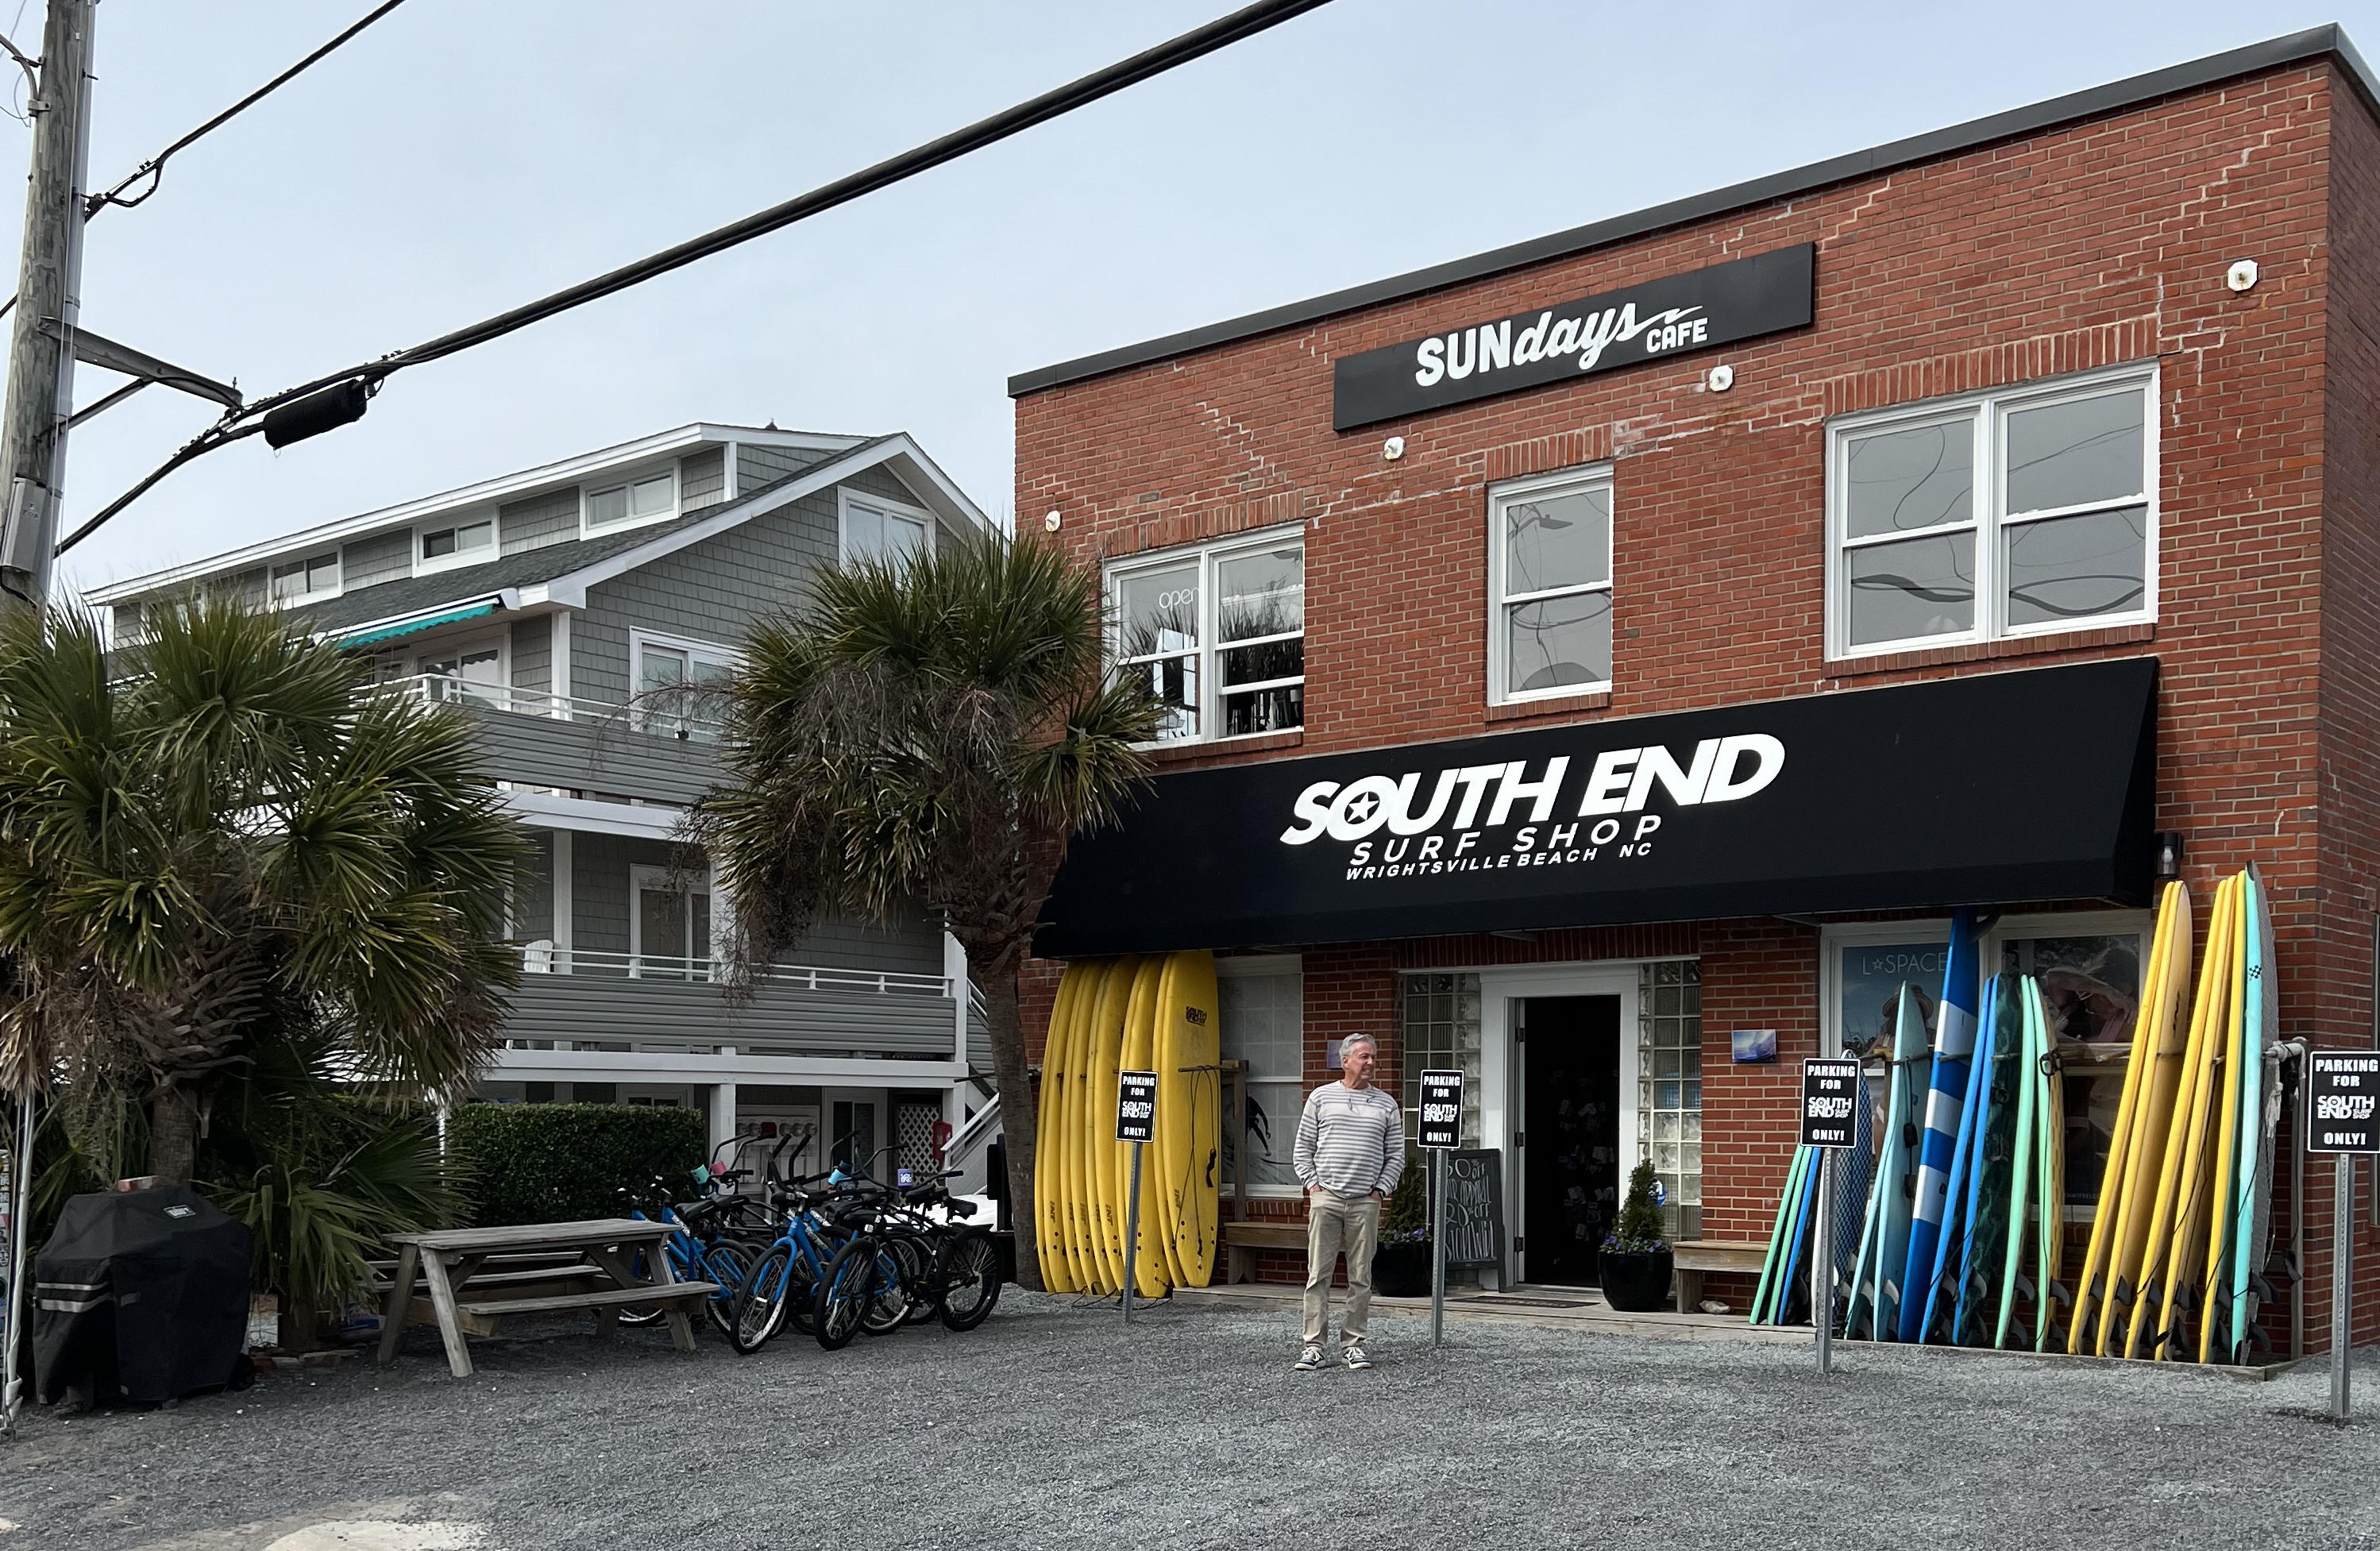 The surf shop owned by life-long Wrightsville Beach resident Jeff DeGroote. 